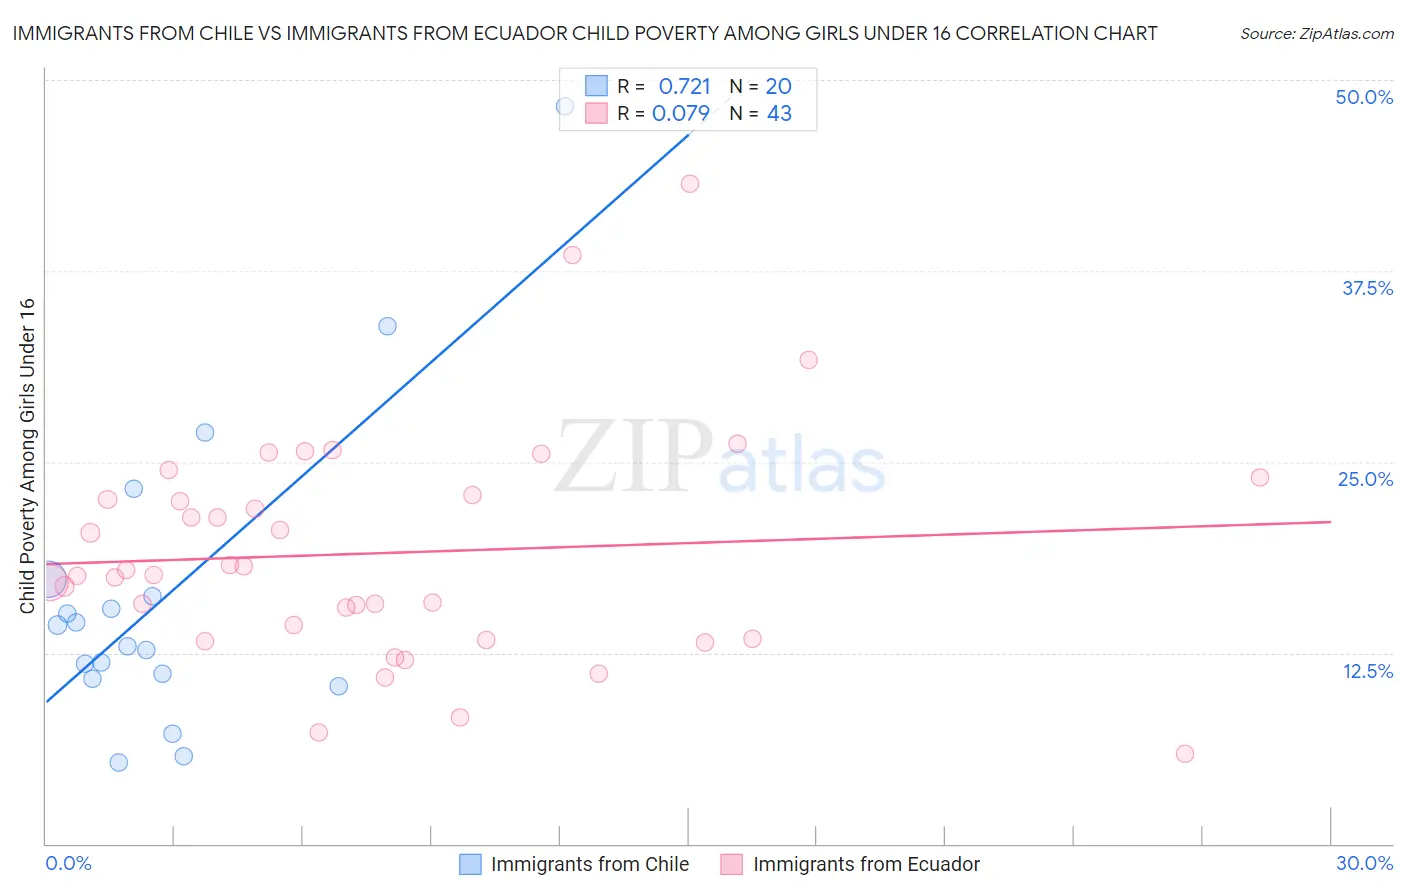 Immigrants from Chile vs Immigrants from Ecuador Child Poverty Among Girls Under 16